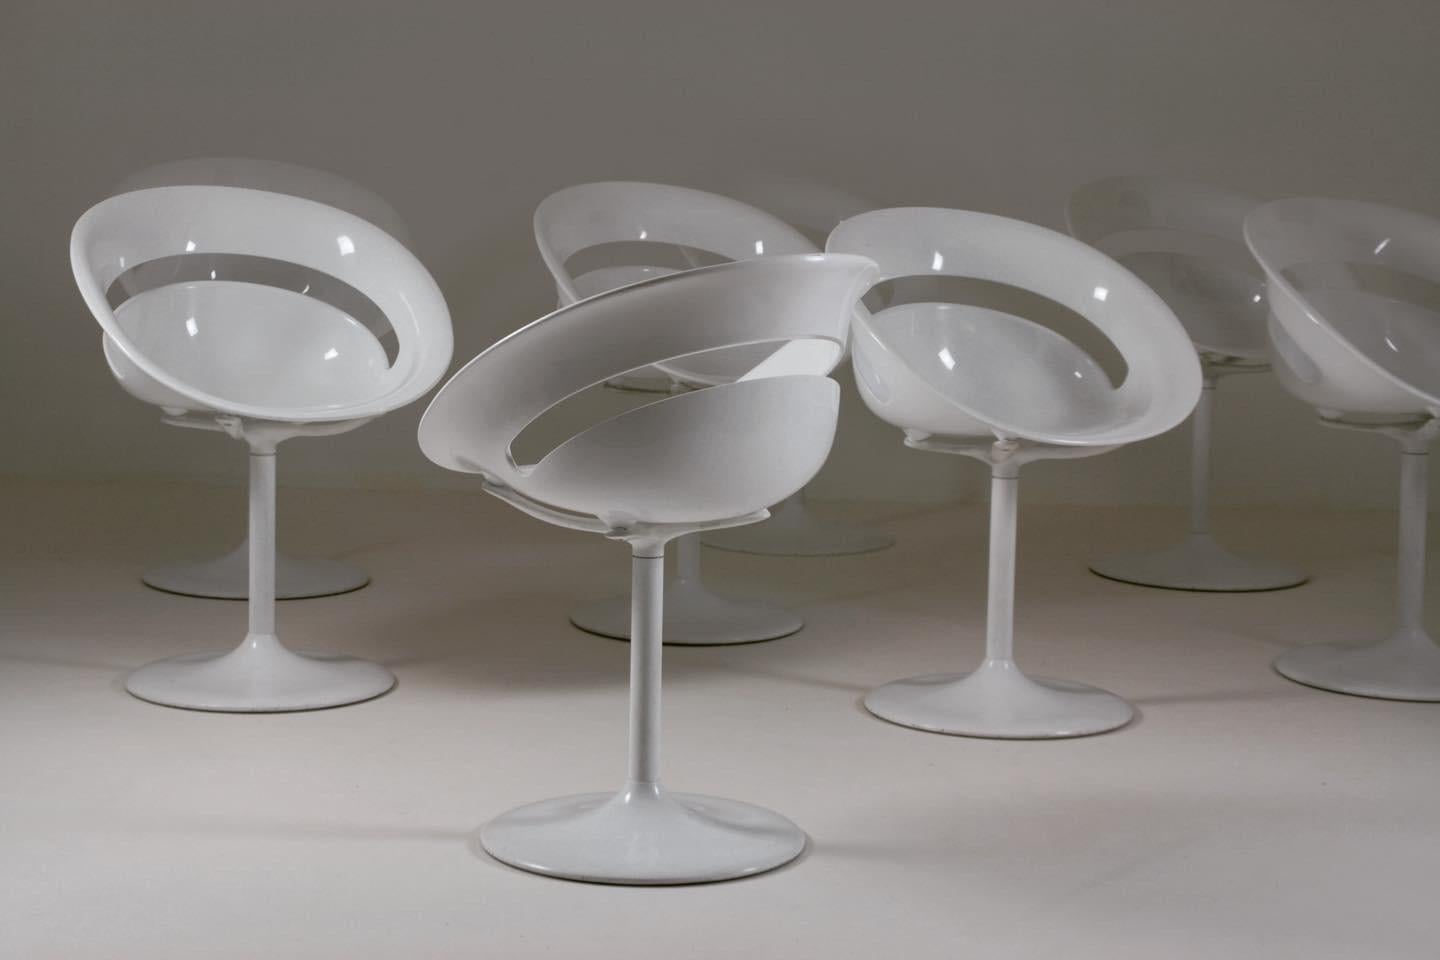 Lot of 10 “Tina” model swivel chairs by Arik Levy for Softline, 1979 and made in Italy. White lacquered metal tulip legs and seat in molded polycarbonate. Rare traces of use (photos). Very comfortable and design with clean lines and curves.
